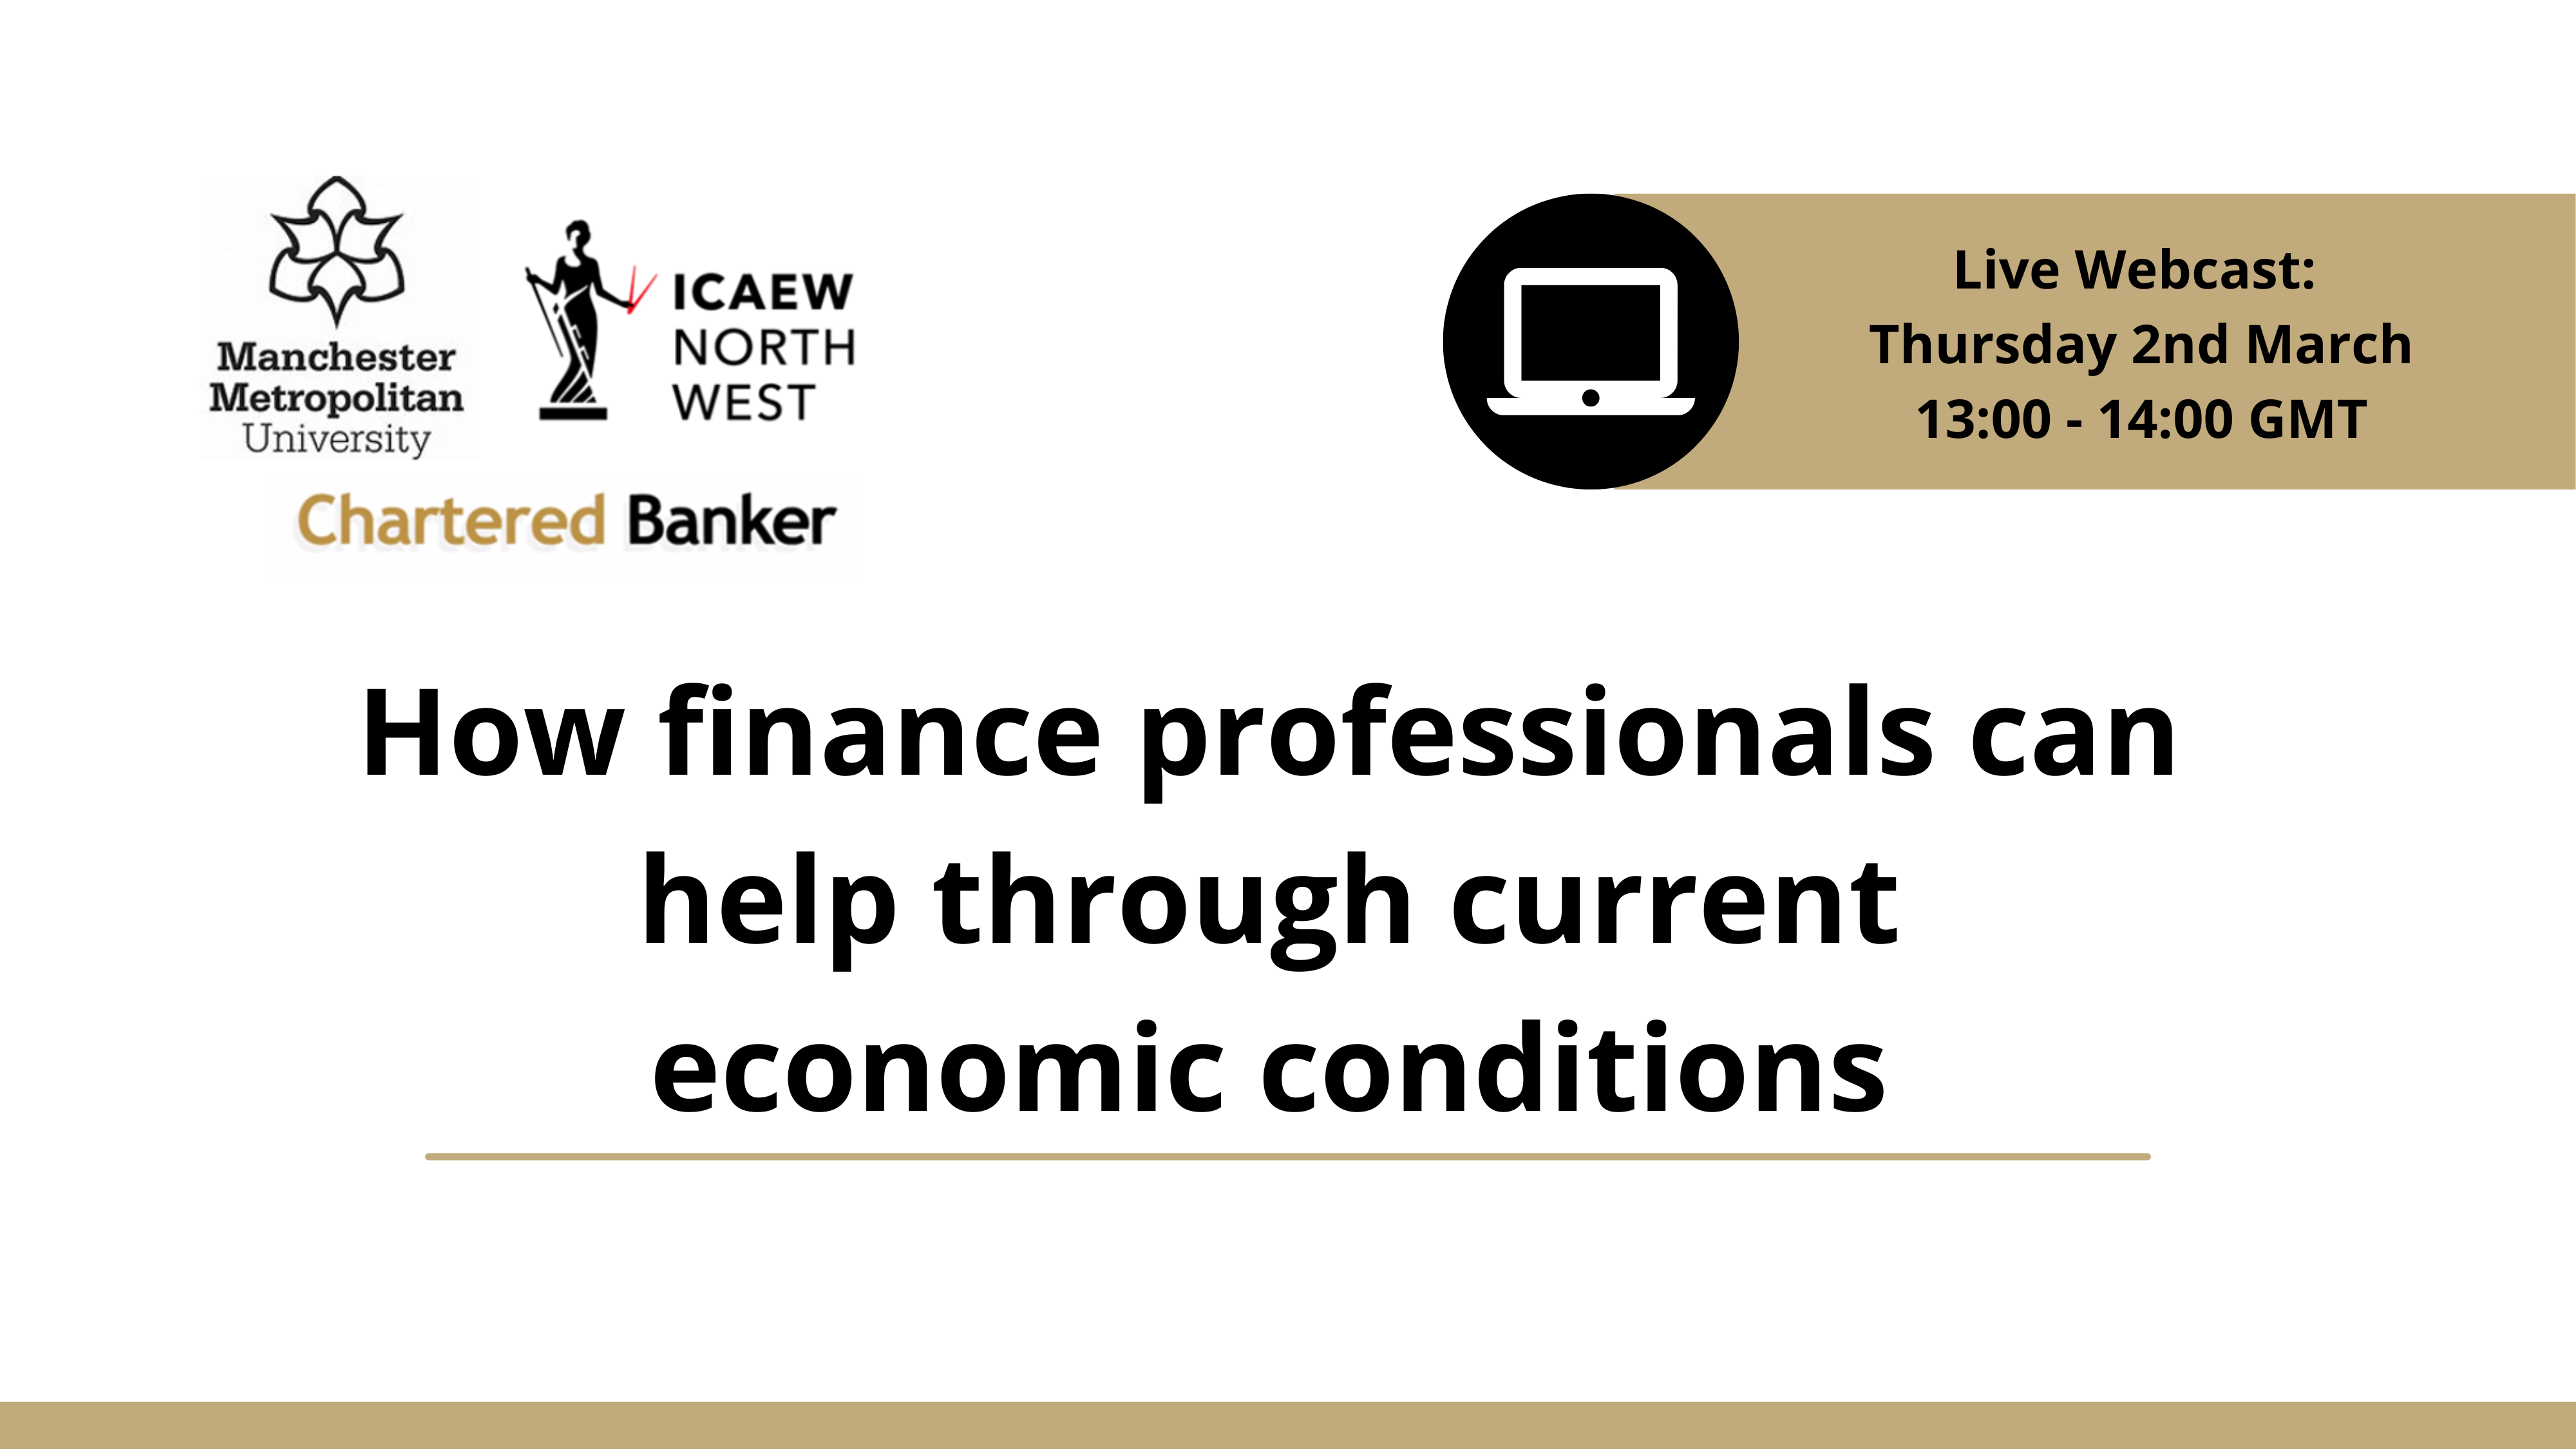 How finance professionals can help through current economic conditions 